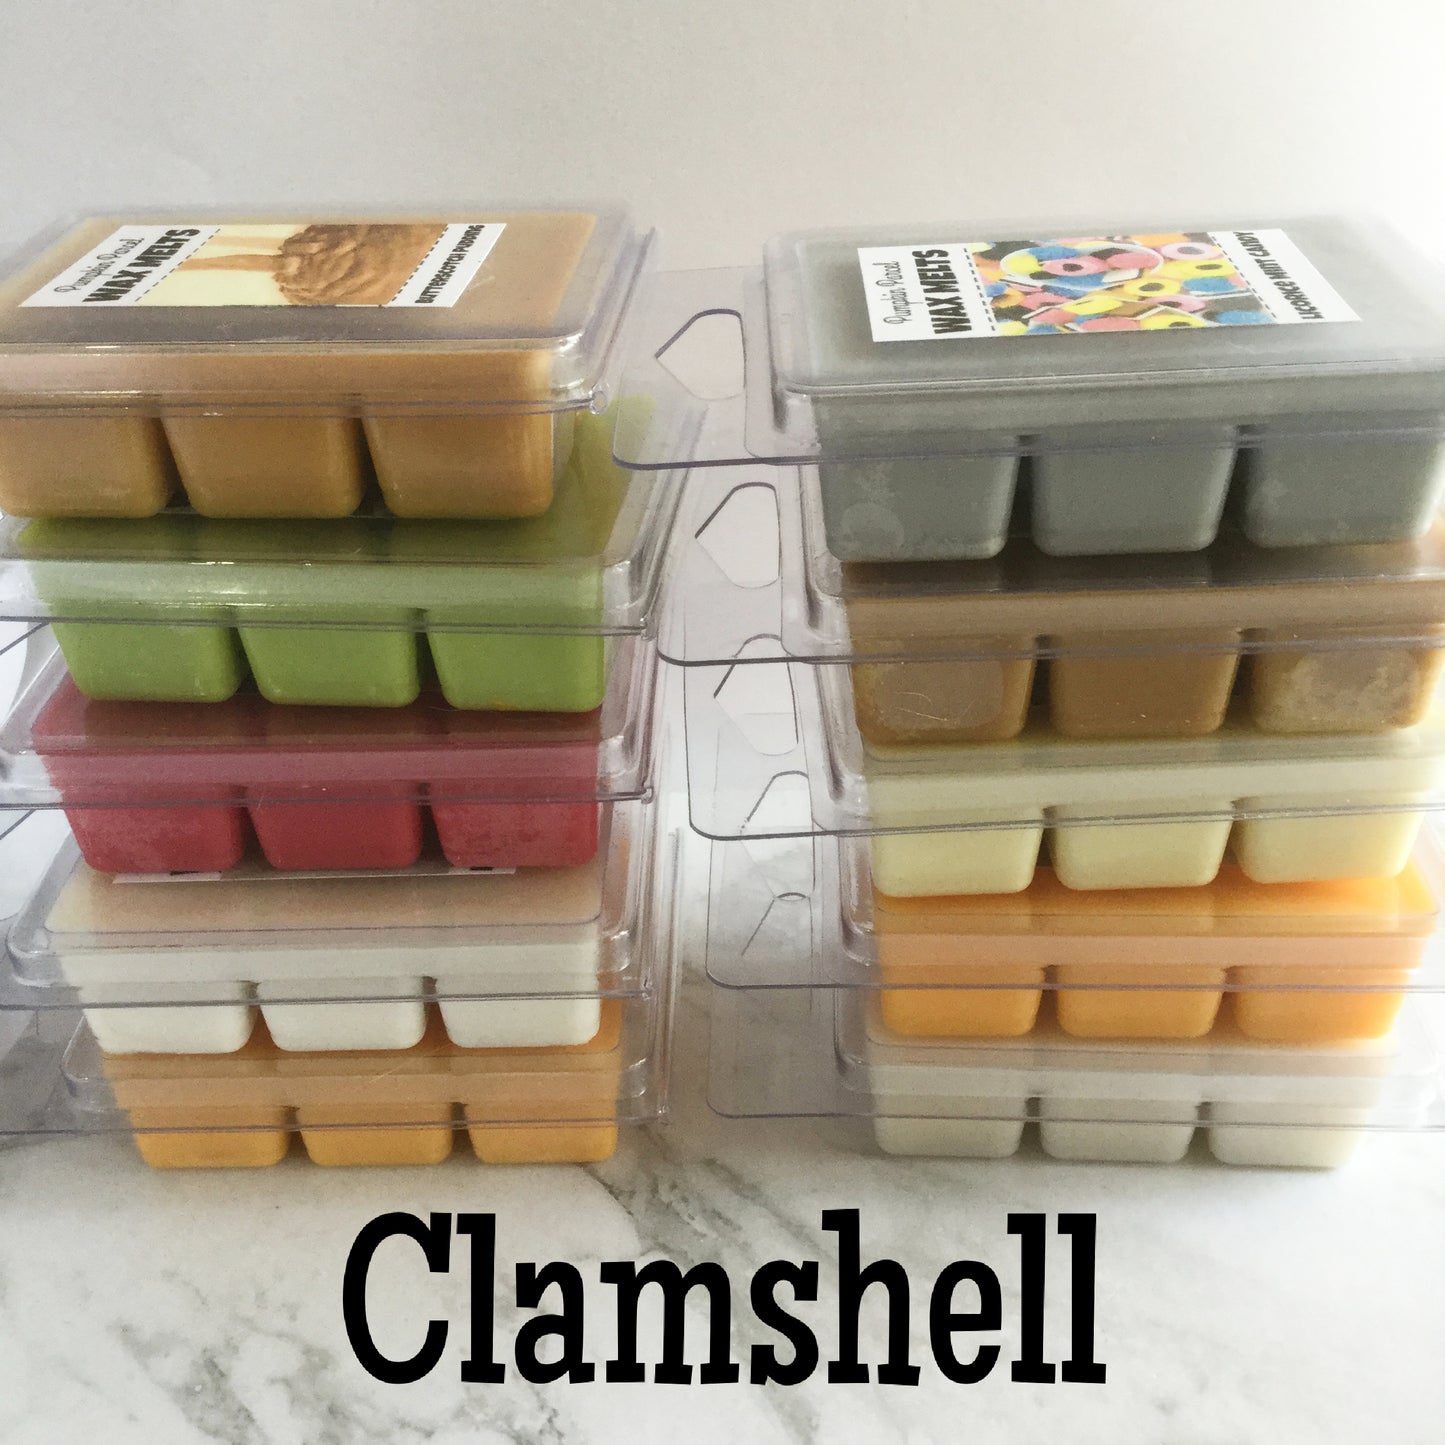 Miss Poison Wax Melts - Perfume Dupe